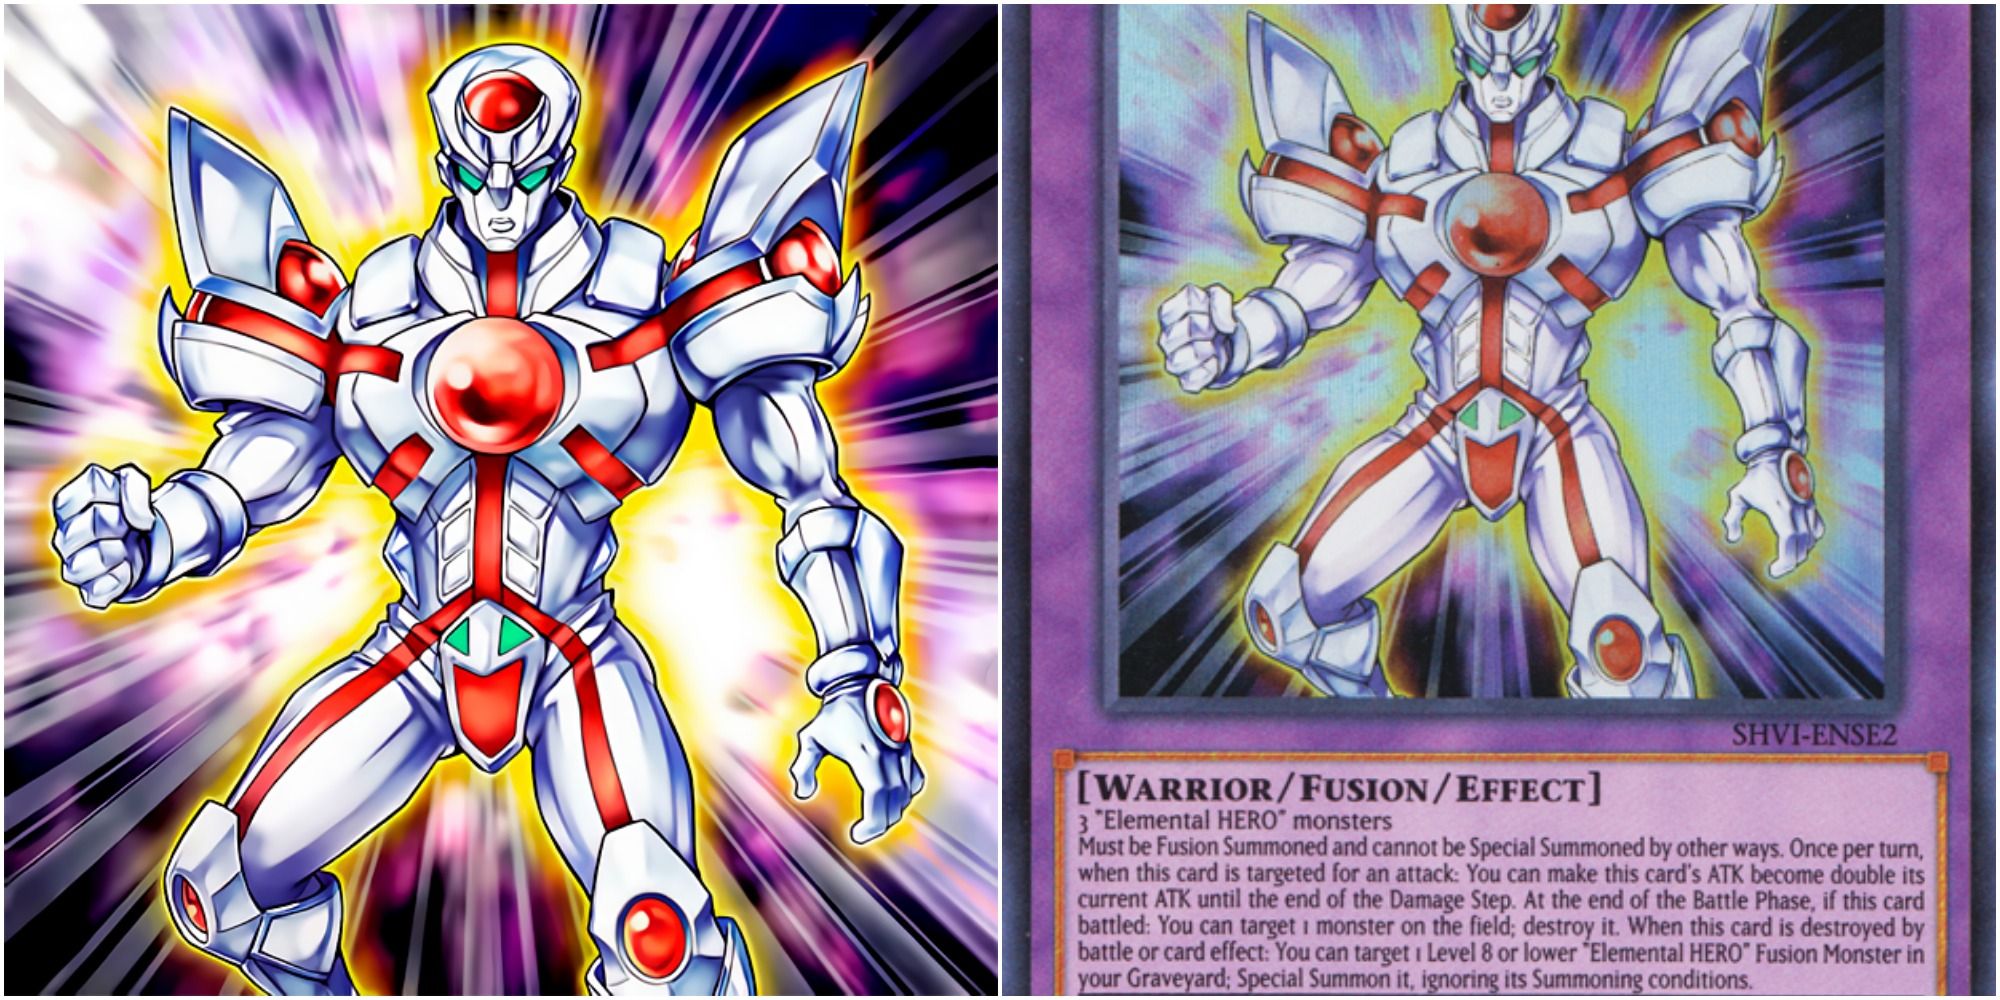 yugioh elemental hero core card art and text